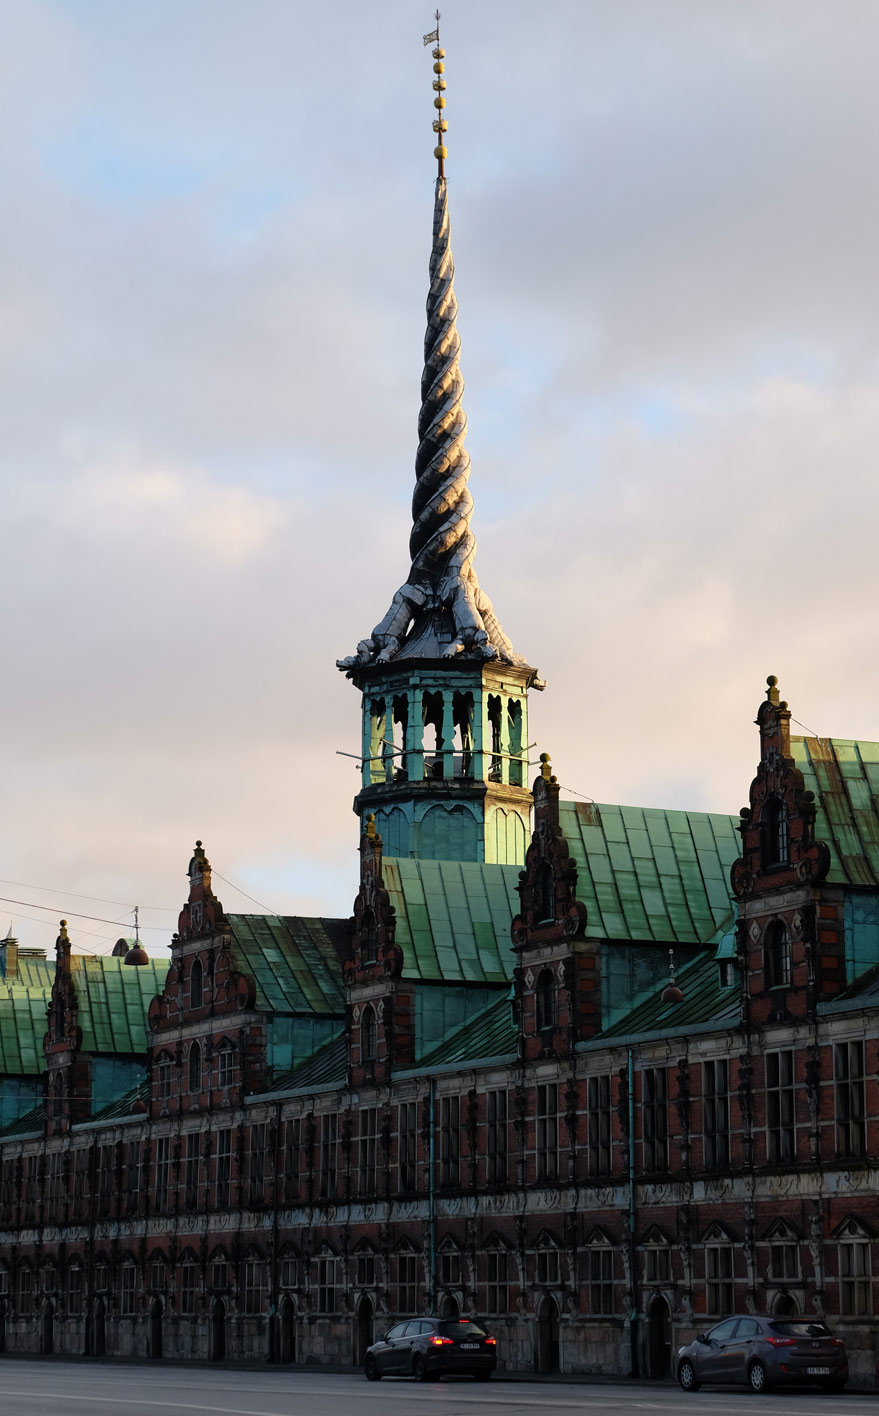 The spire at Børsen takes the form of four dragons' tails